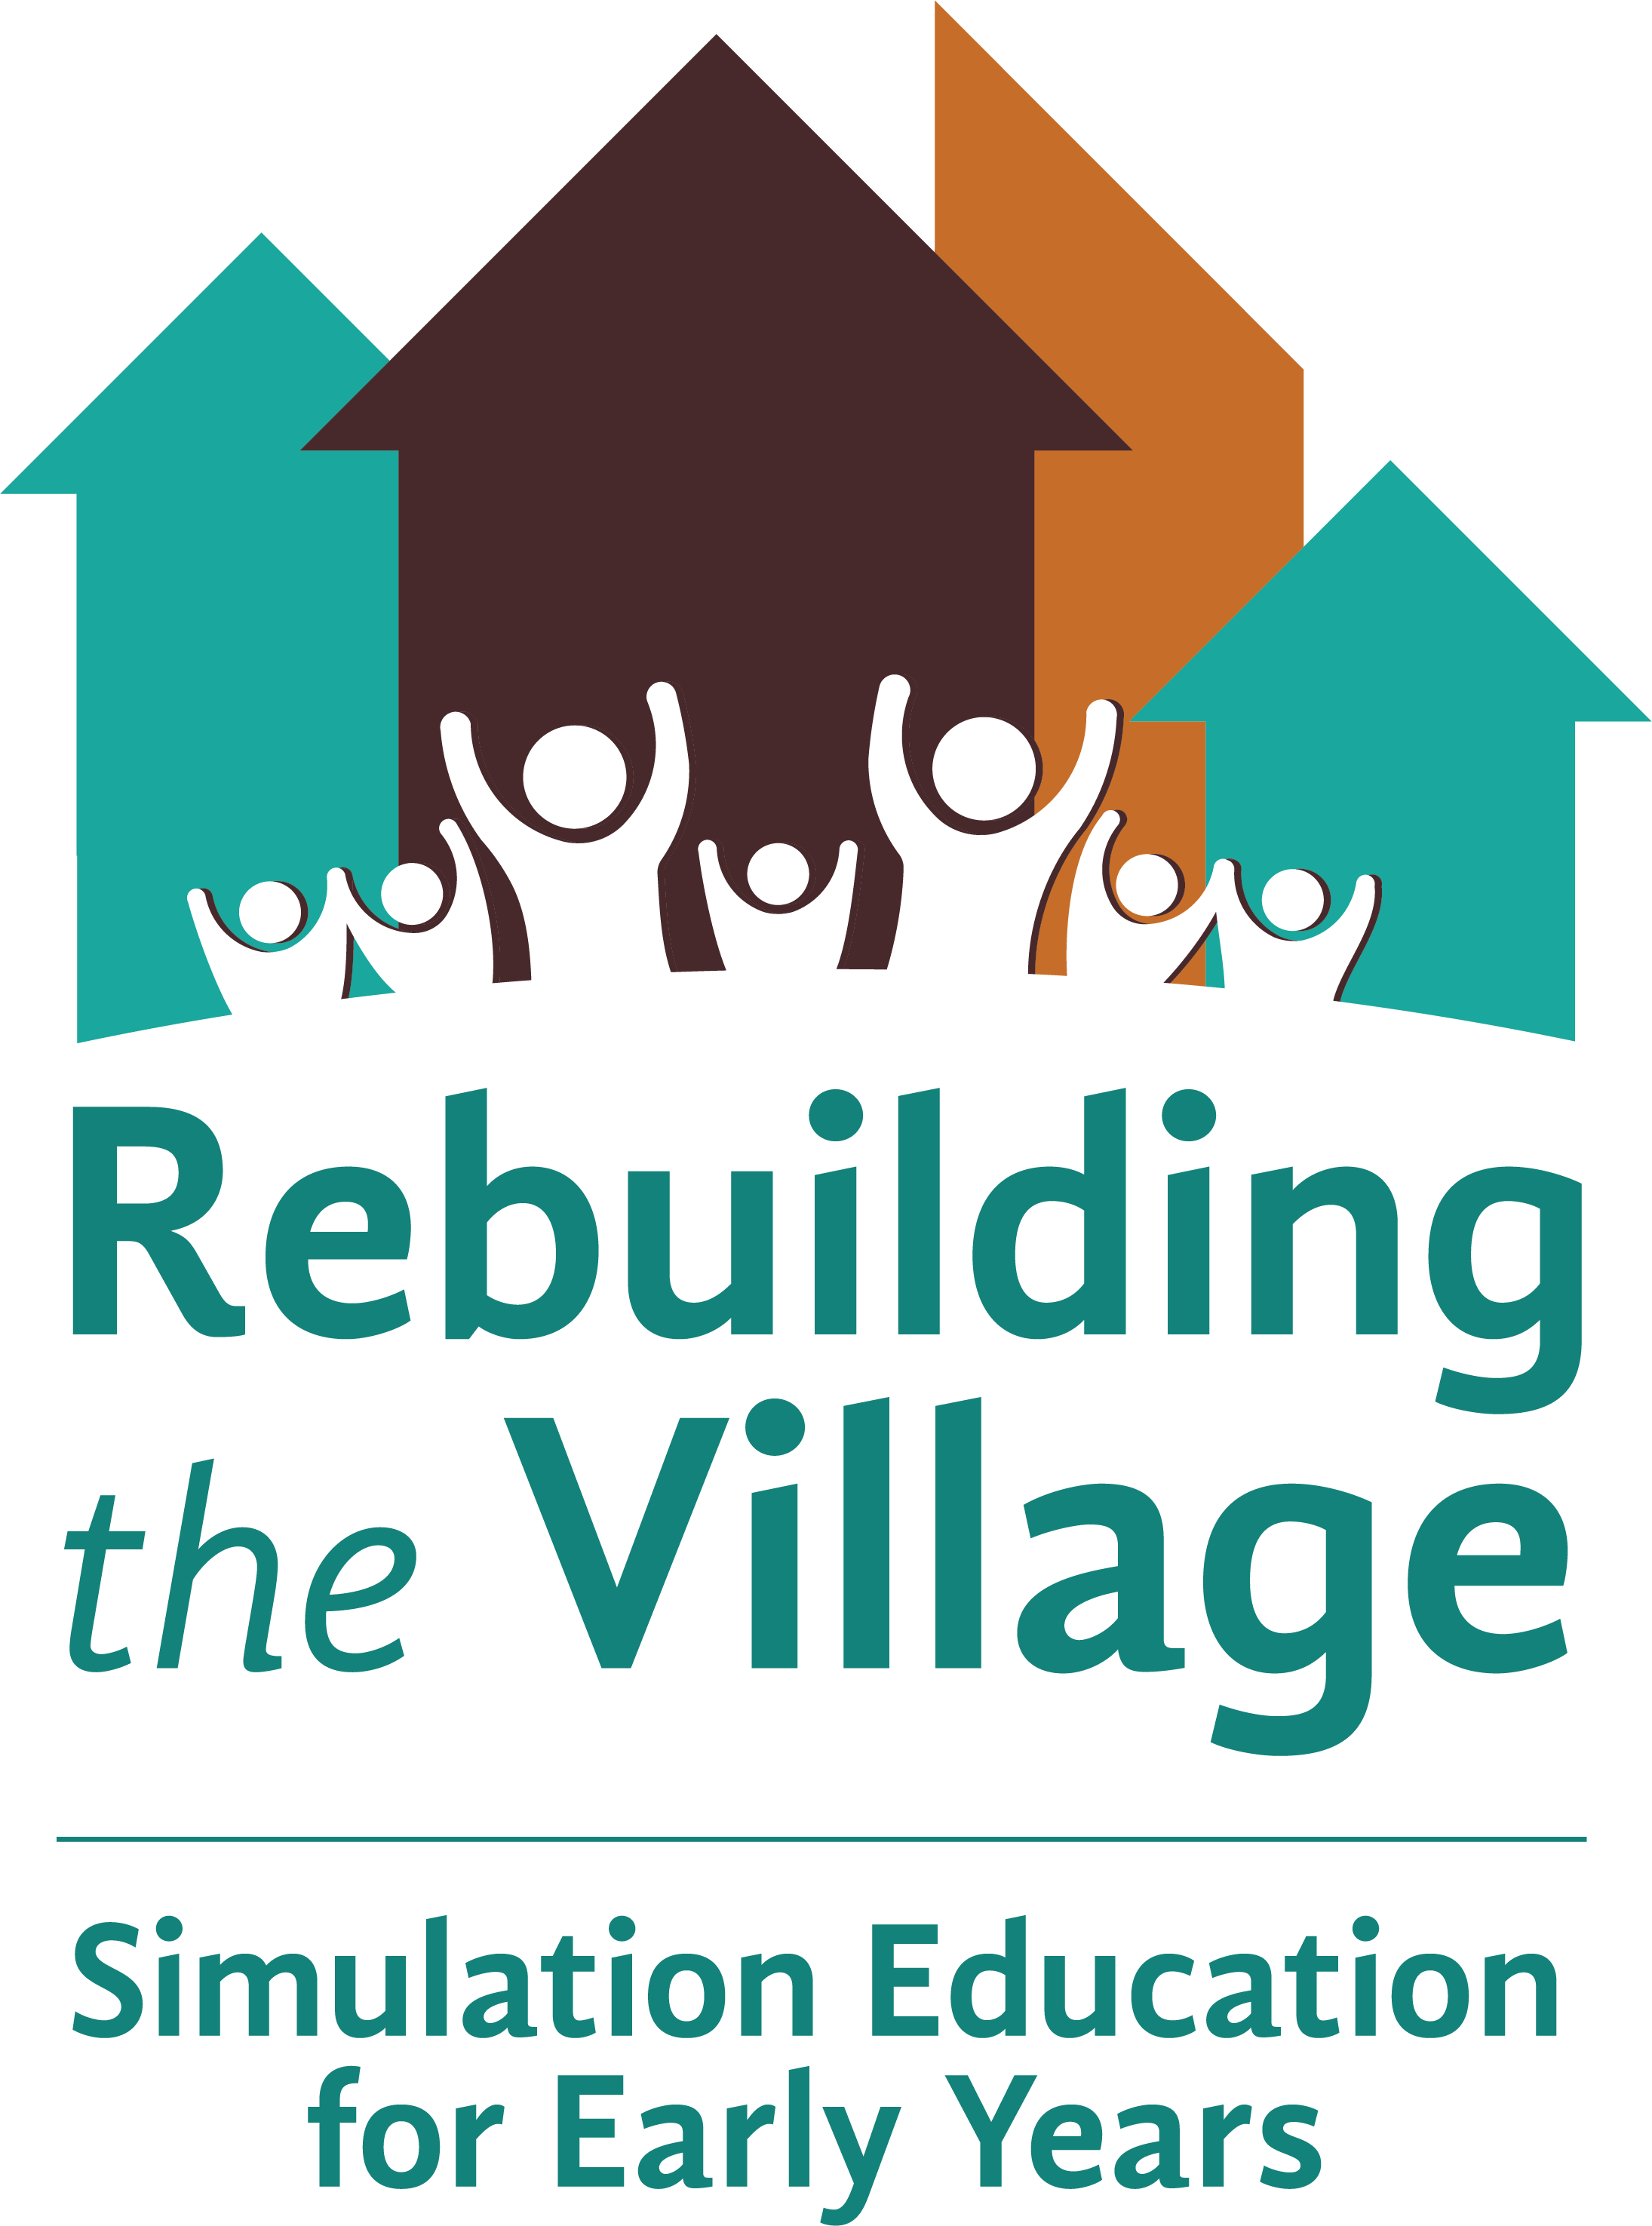 An image of the Durham Rebuilding the Village logo